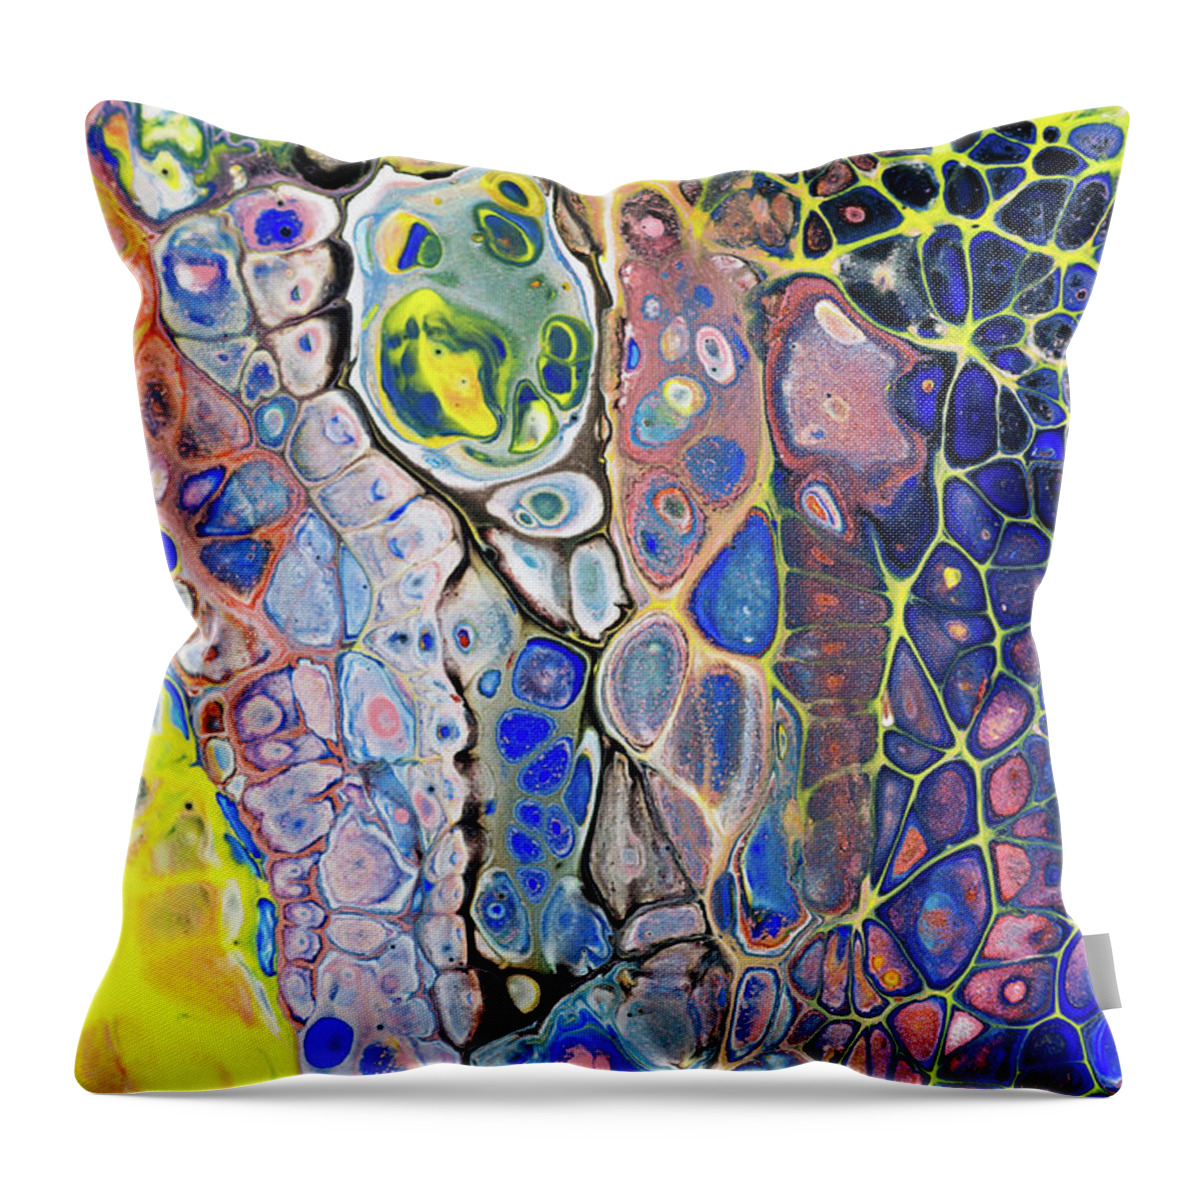 Jenny Rainbow Fine Art Photography Throw Pillow featuring the painting Colorful Night Dreams. Abstract Fluid Acrylic Painting by Jenny Rainbow